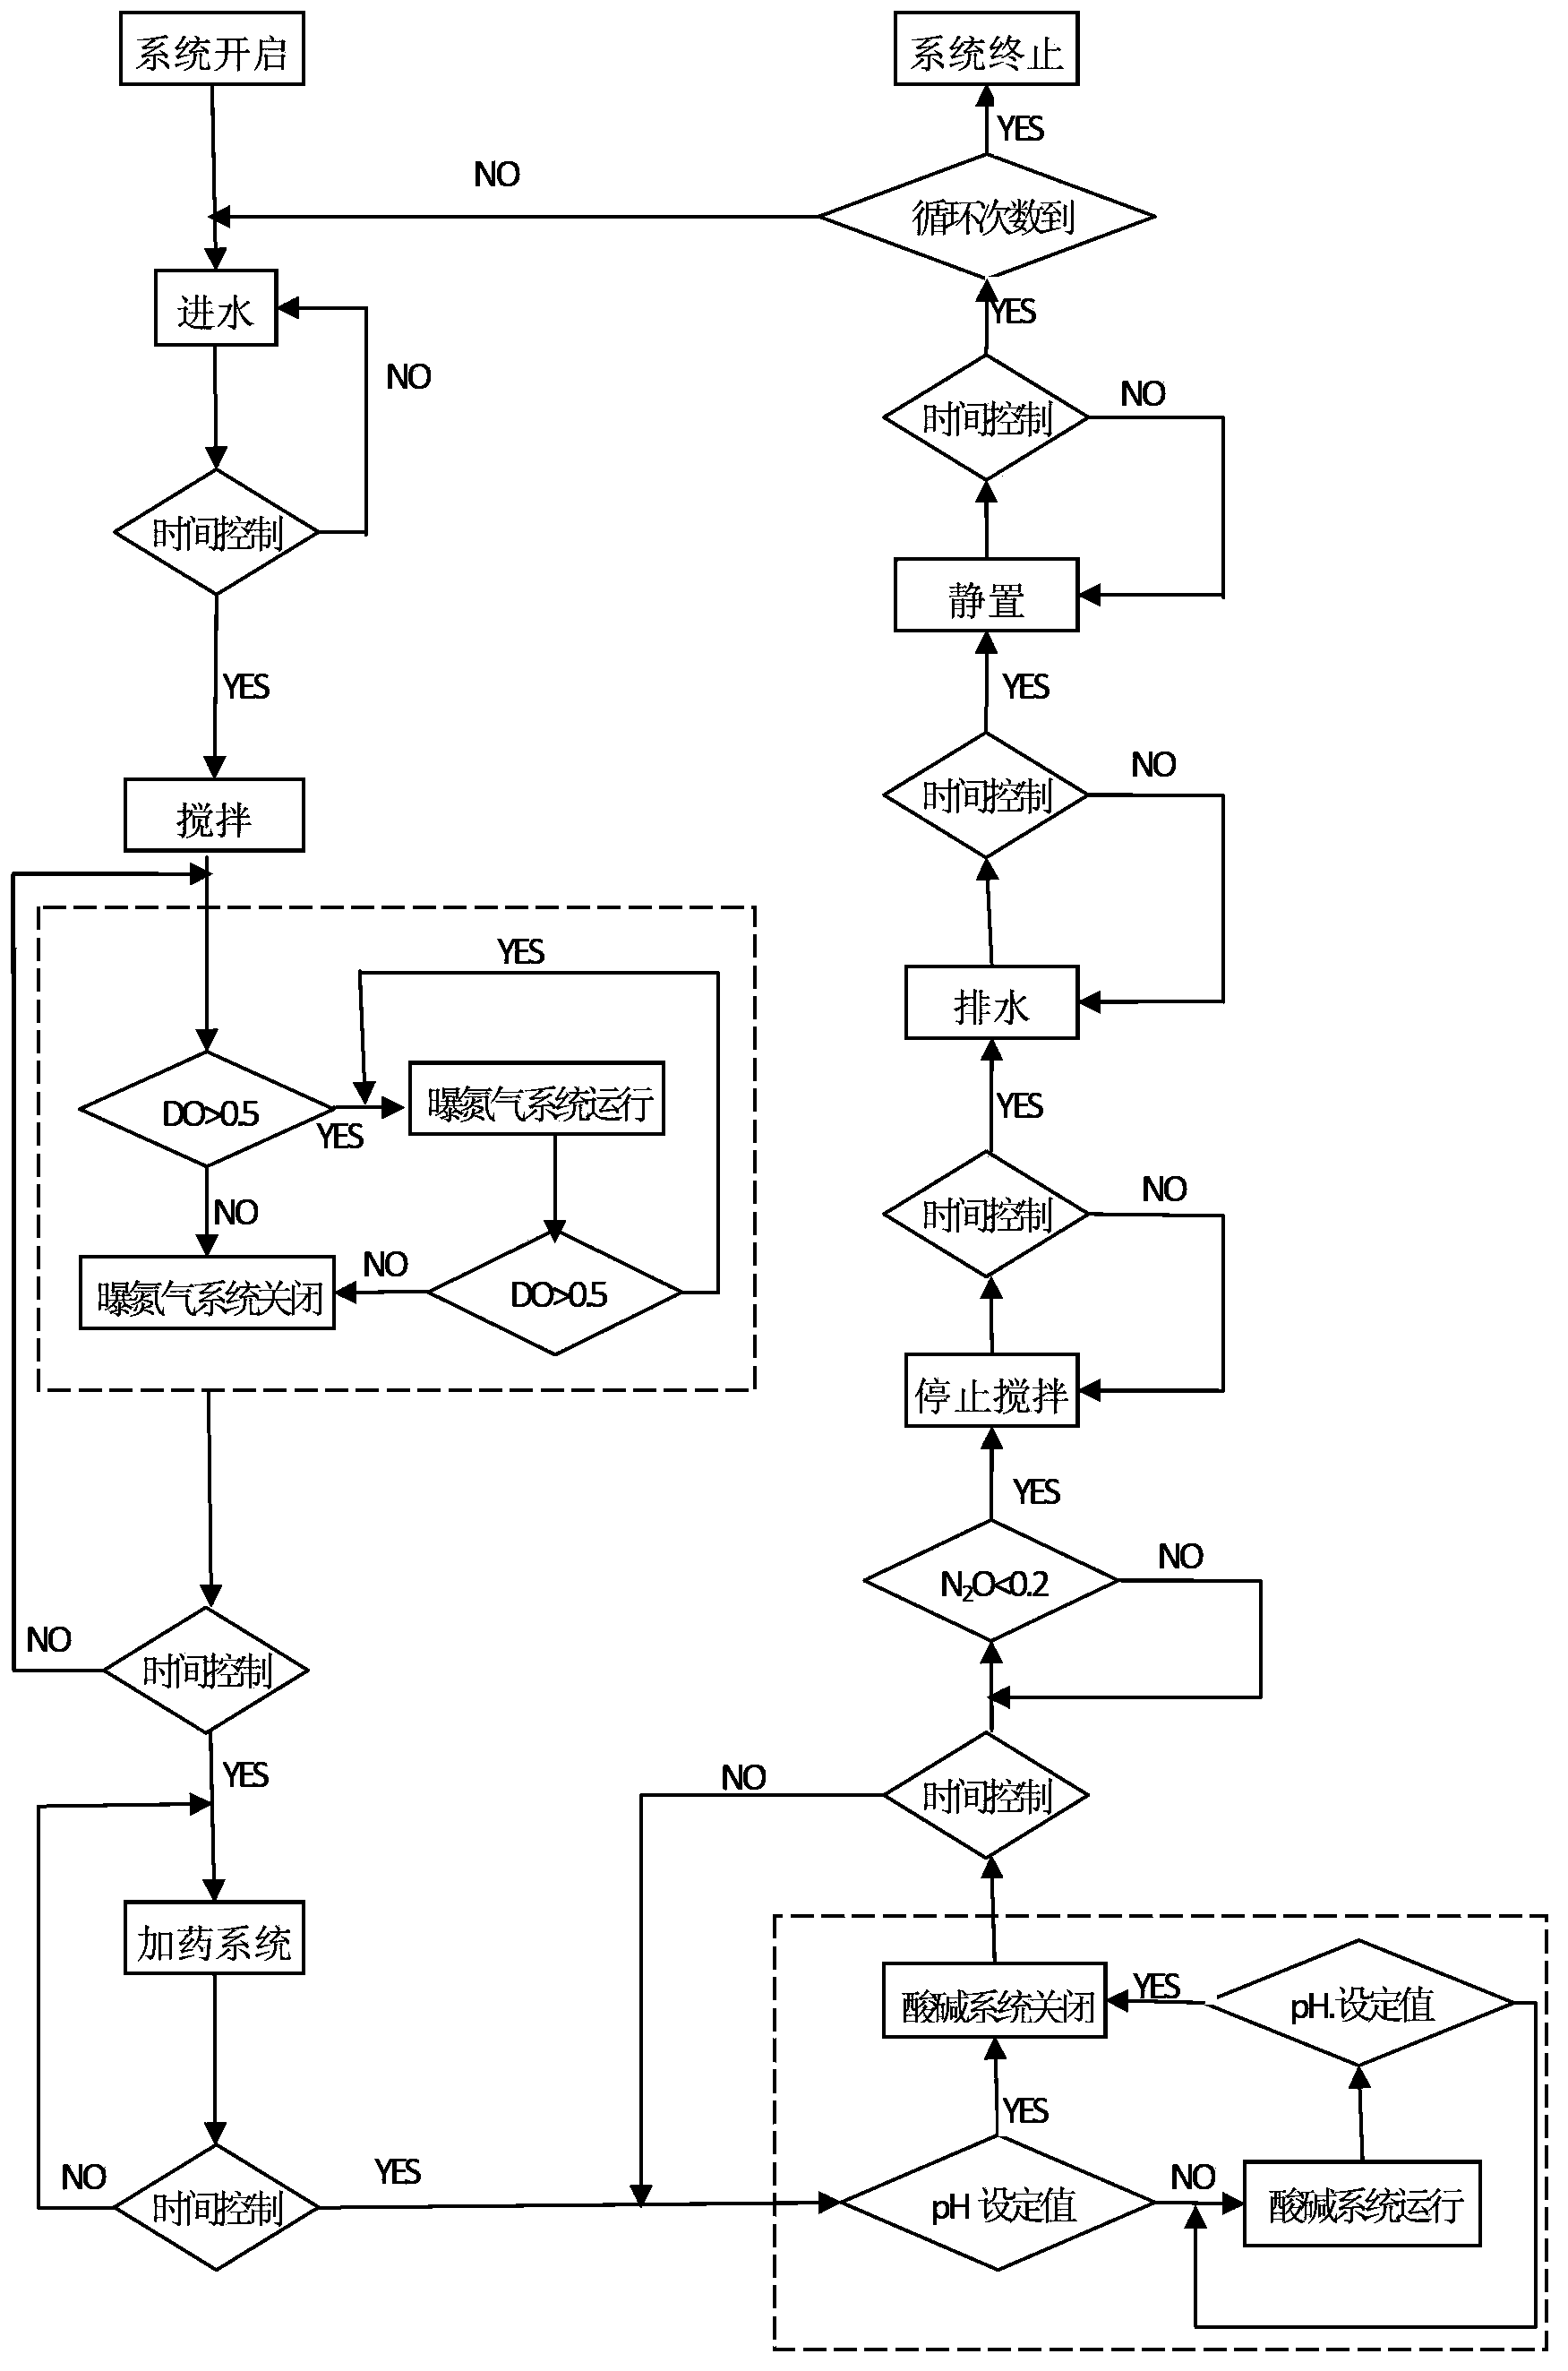 Reduction control device and method for N2O produced in denitrification dephosphorization process